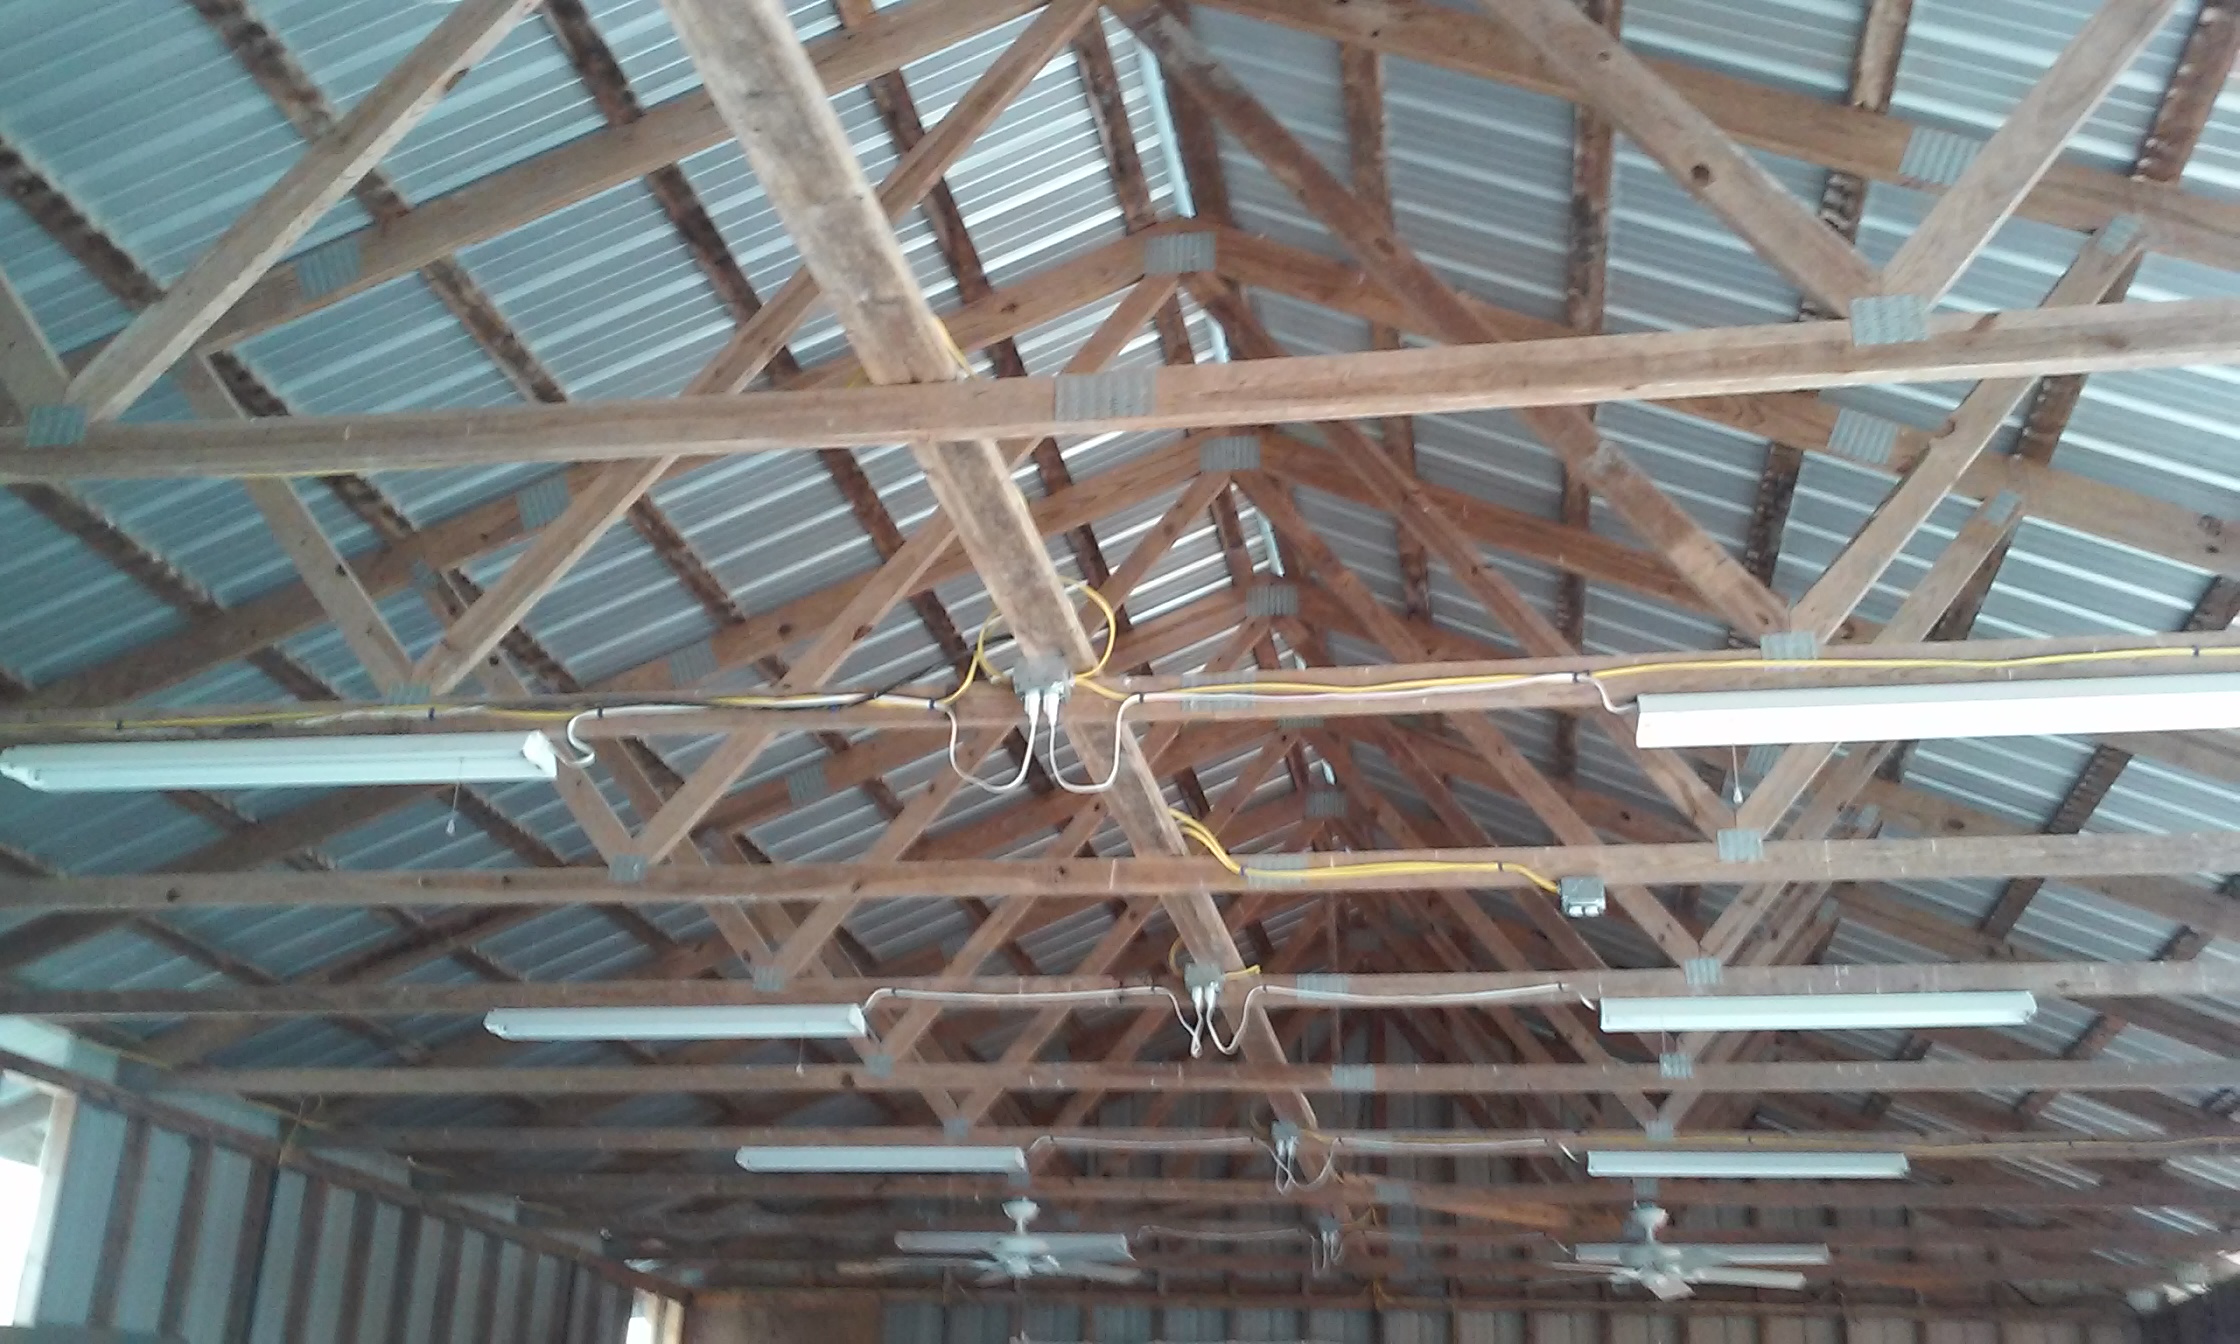 NWA Electric Installation of Agricultural lighting and indoor shop wiring.